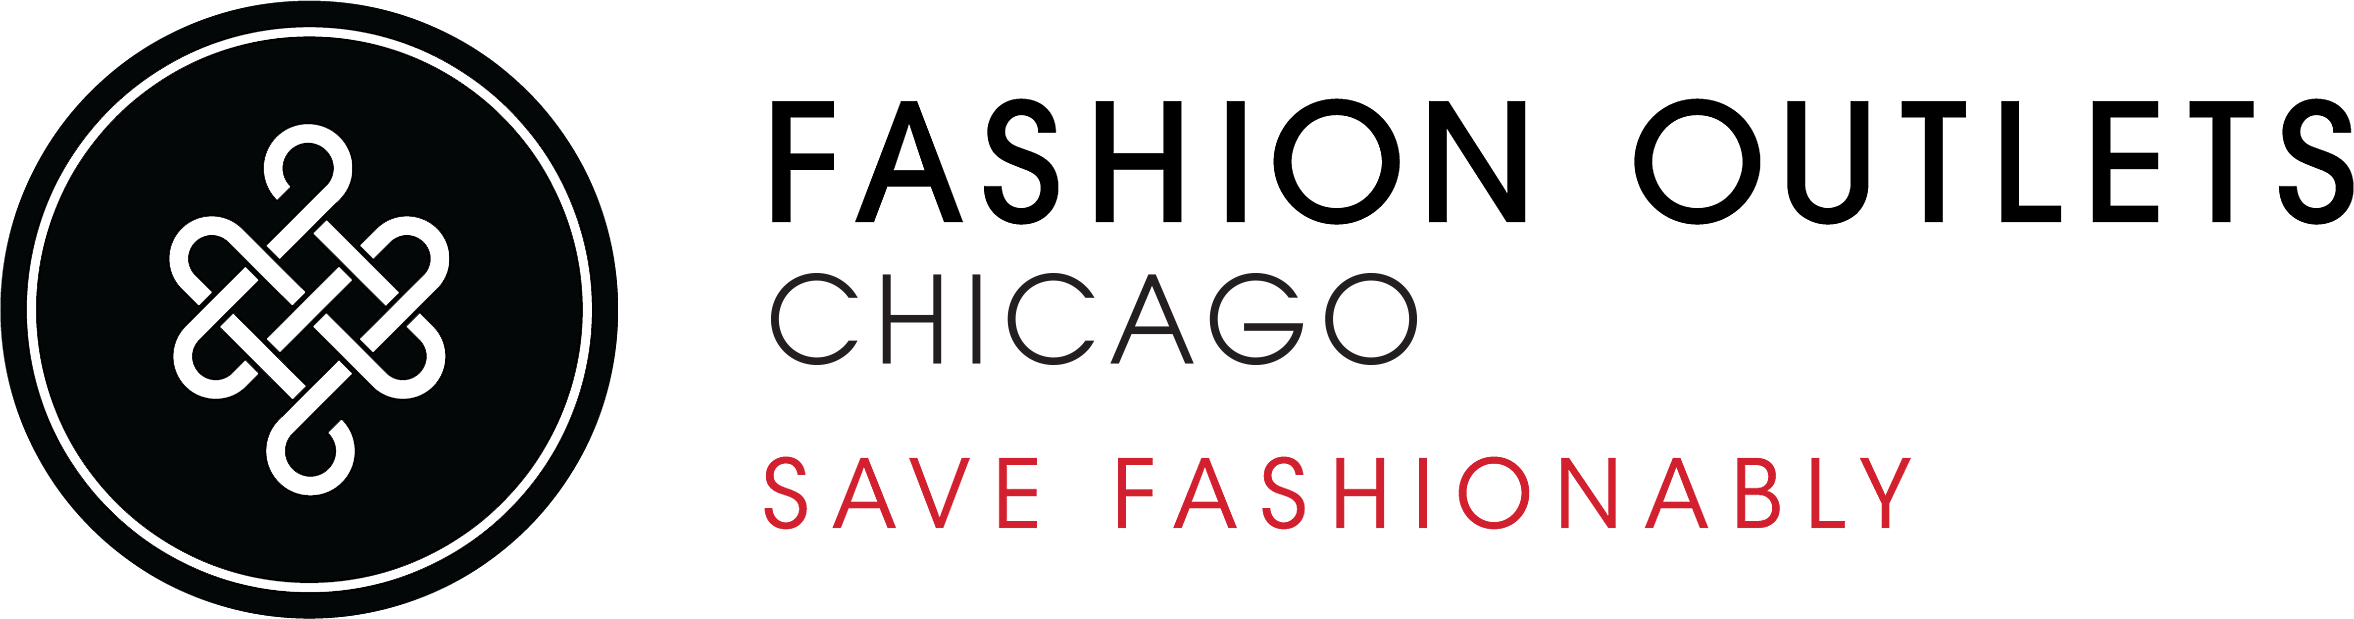 Fashion Outlets Chicago Save Fashionably